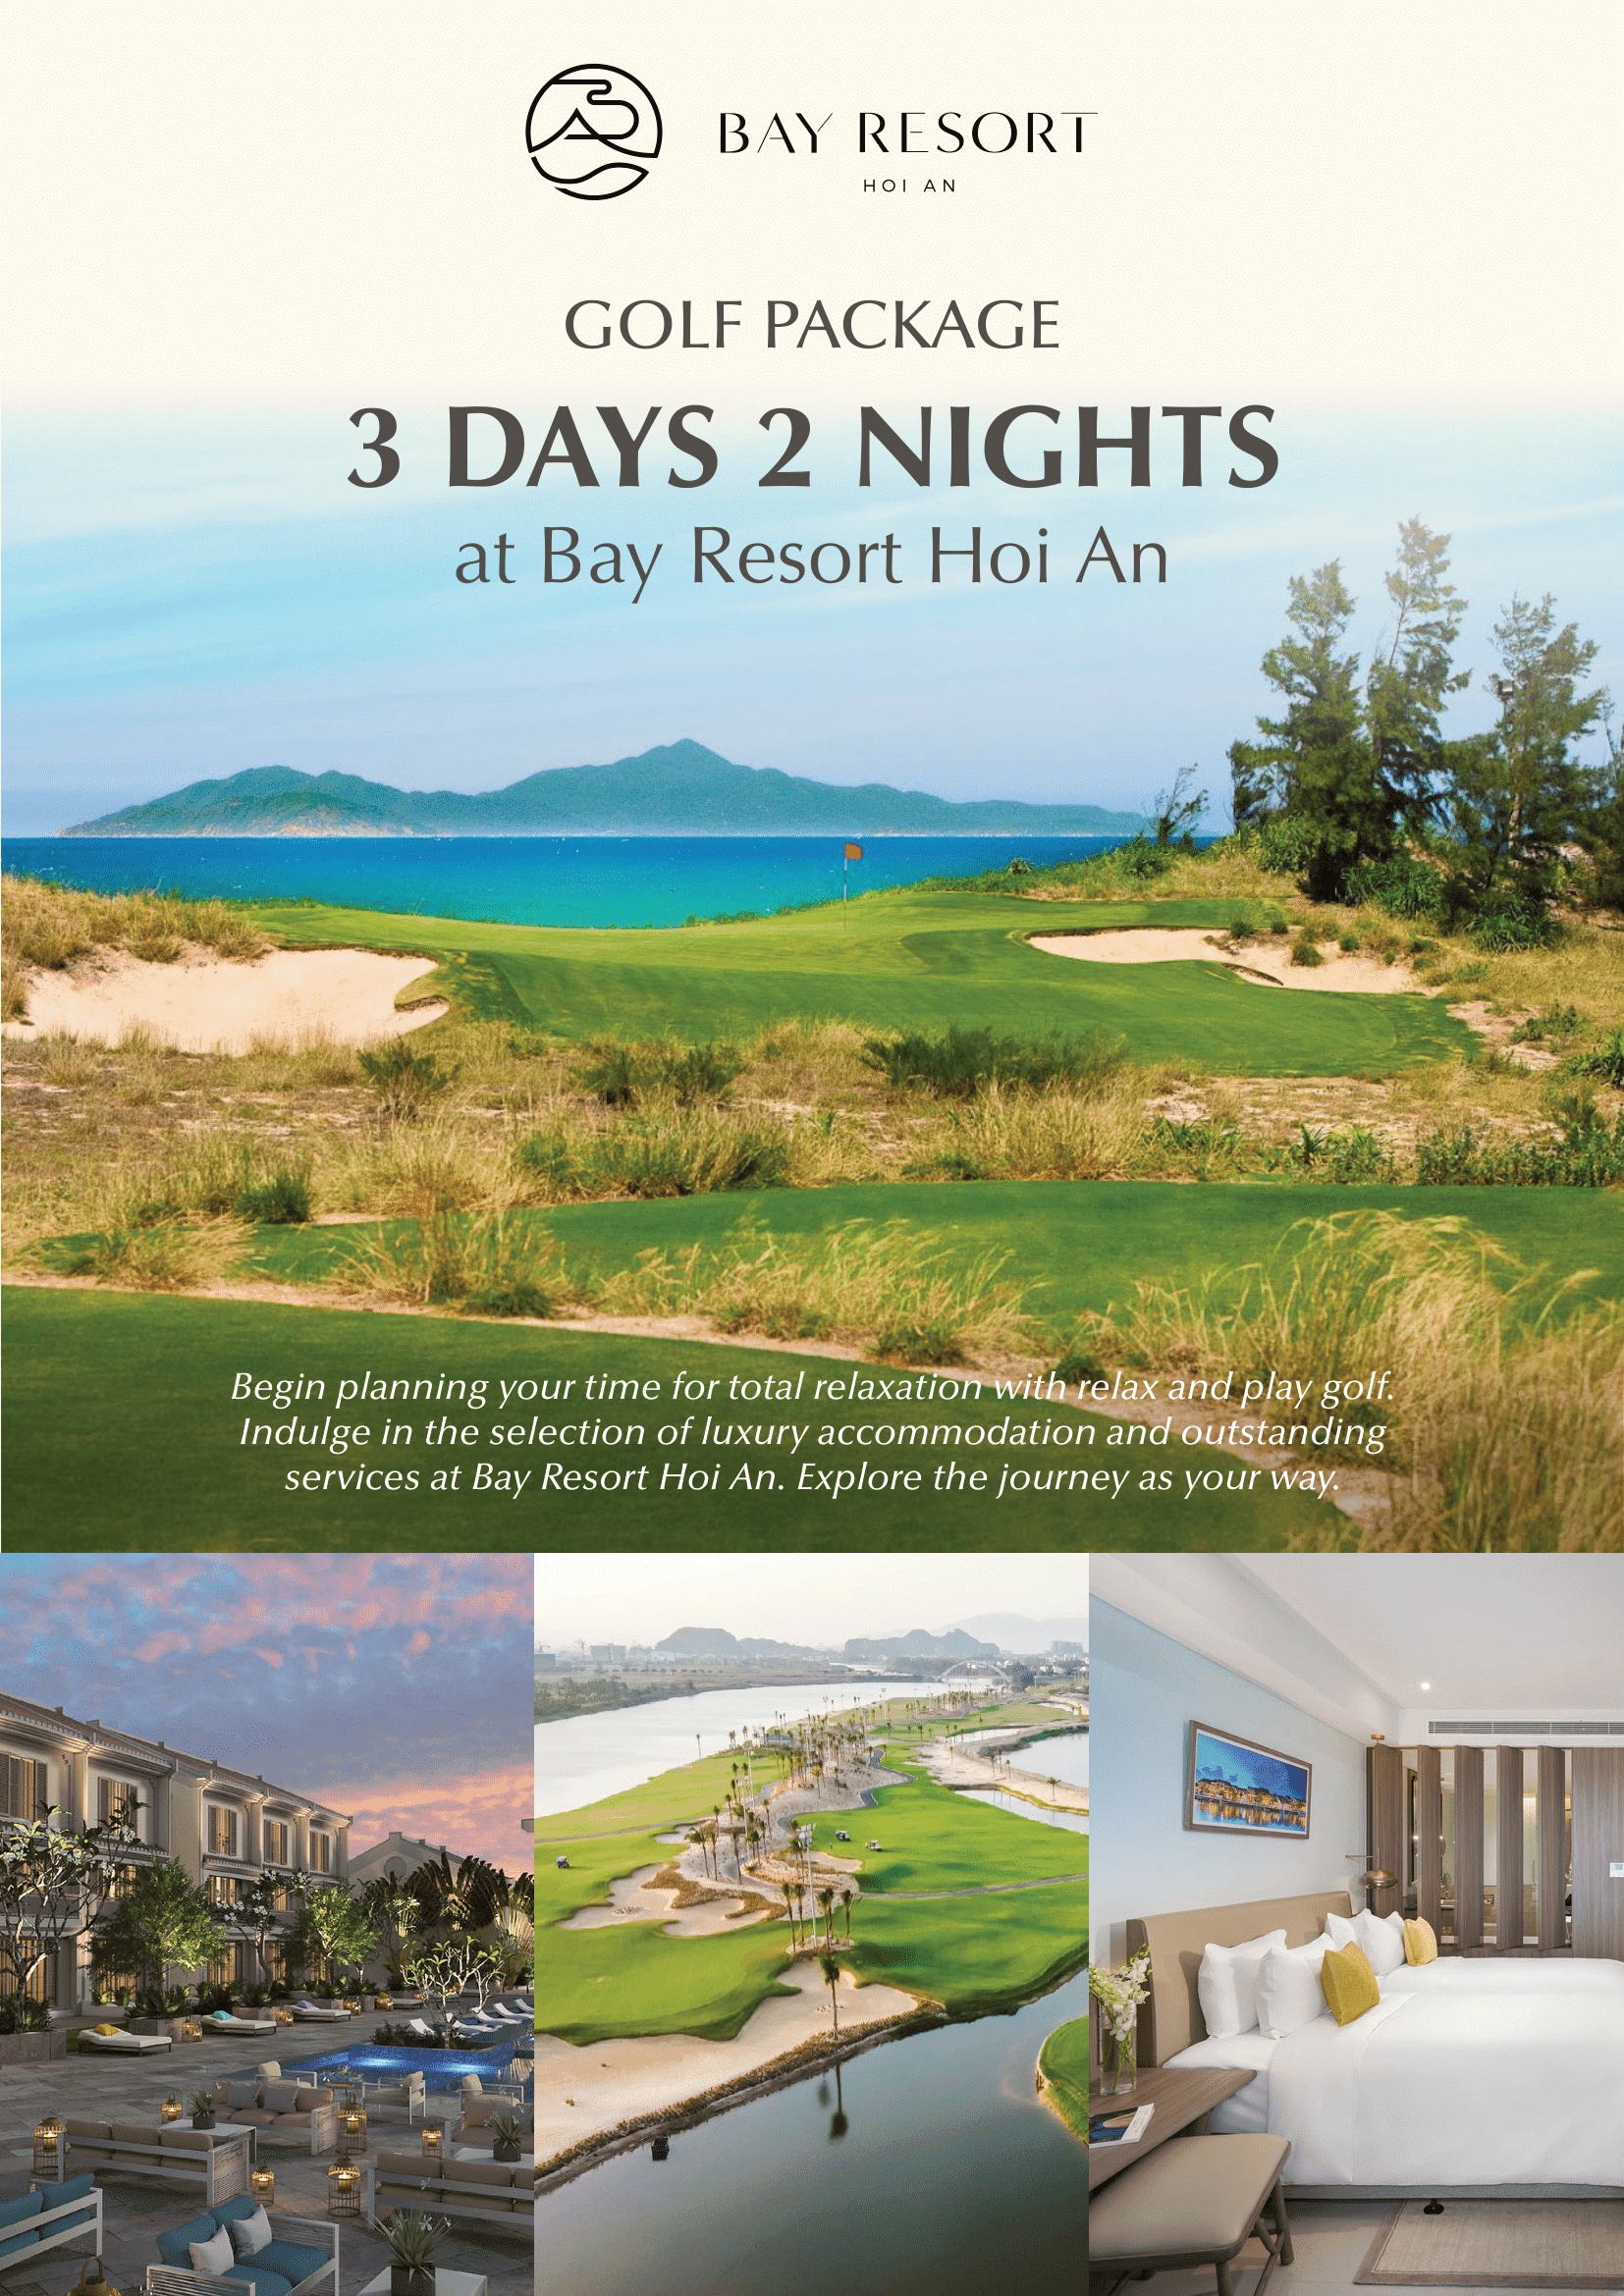 Golf Package 3 Days 2 Nights Promotion | Bay Resort Hoi An